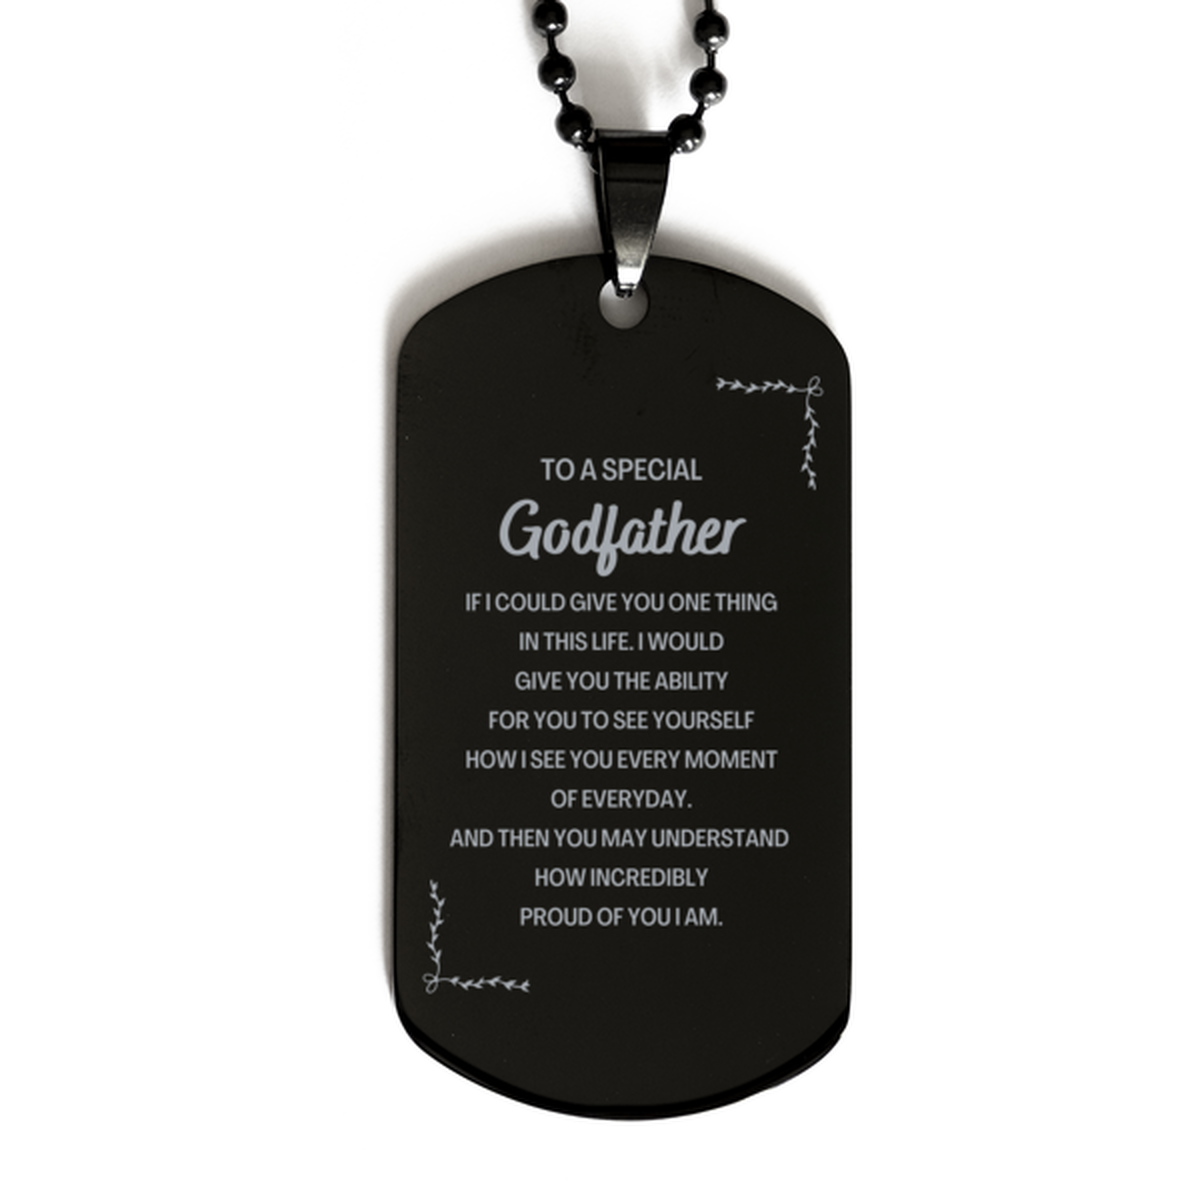 To My Godfather Black Dog Tag, Gifts For Godfather Engraved, Inspirational Gifts for Christmas Birthday, Epic Gifts for Godfather To A Special Godfather how incredibly proud of you I am